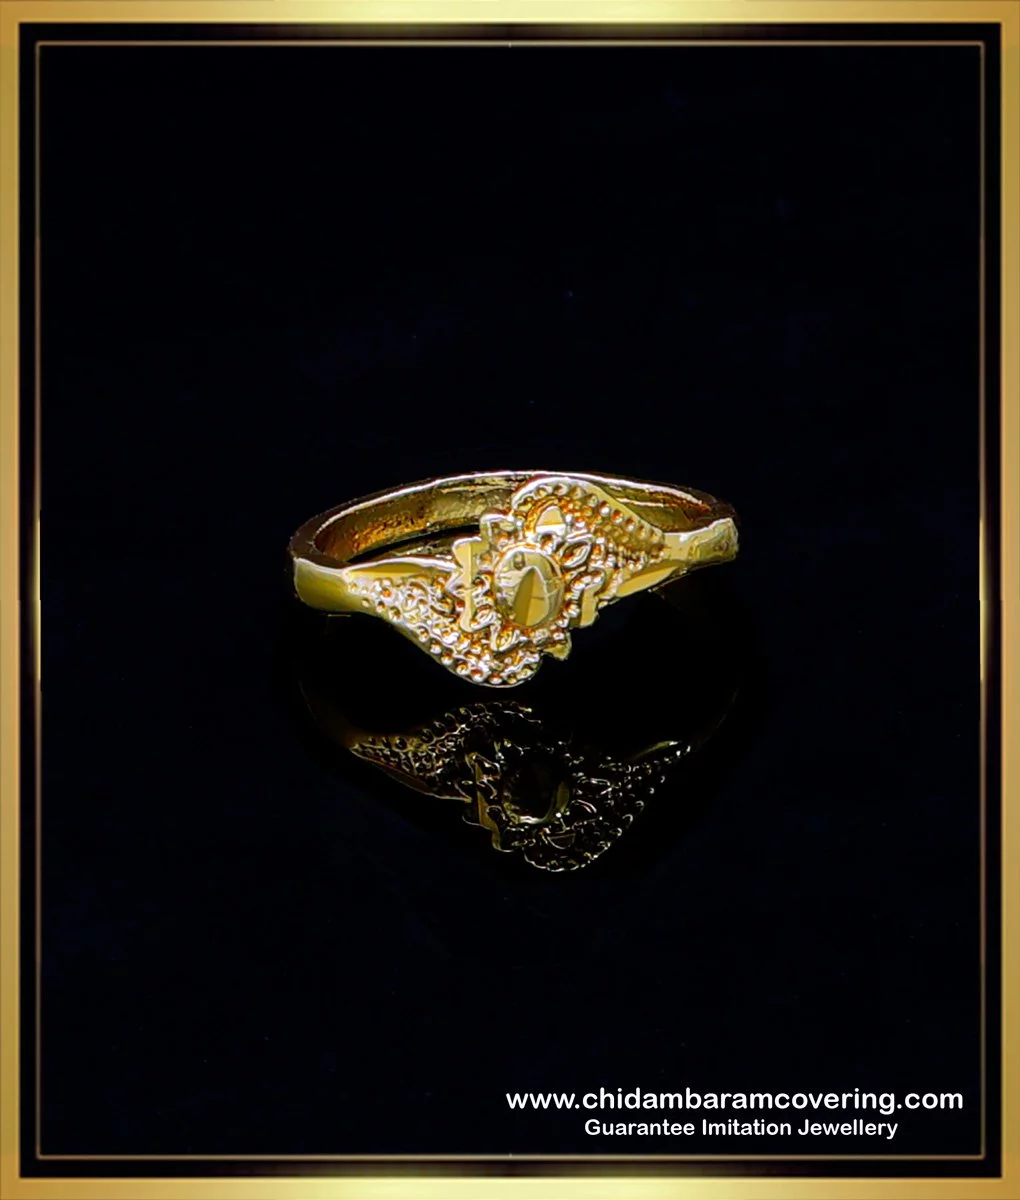 Buy quality 92.5 Silver White Diamond Fancy Design Ladies Ring in Ahmedabad